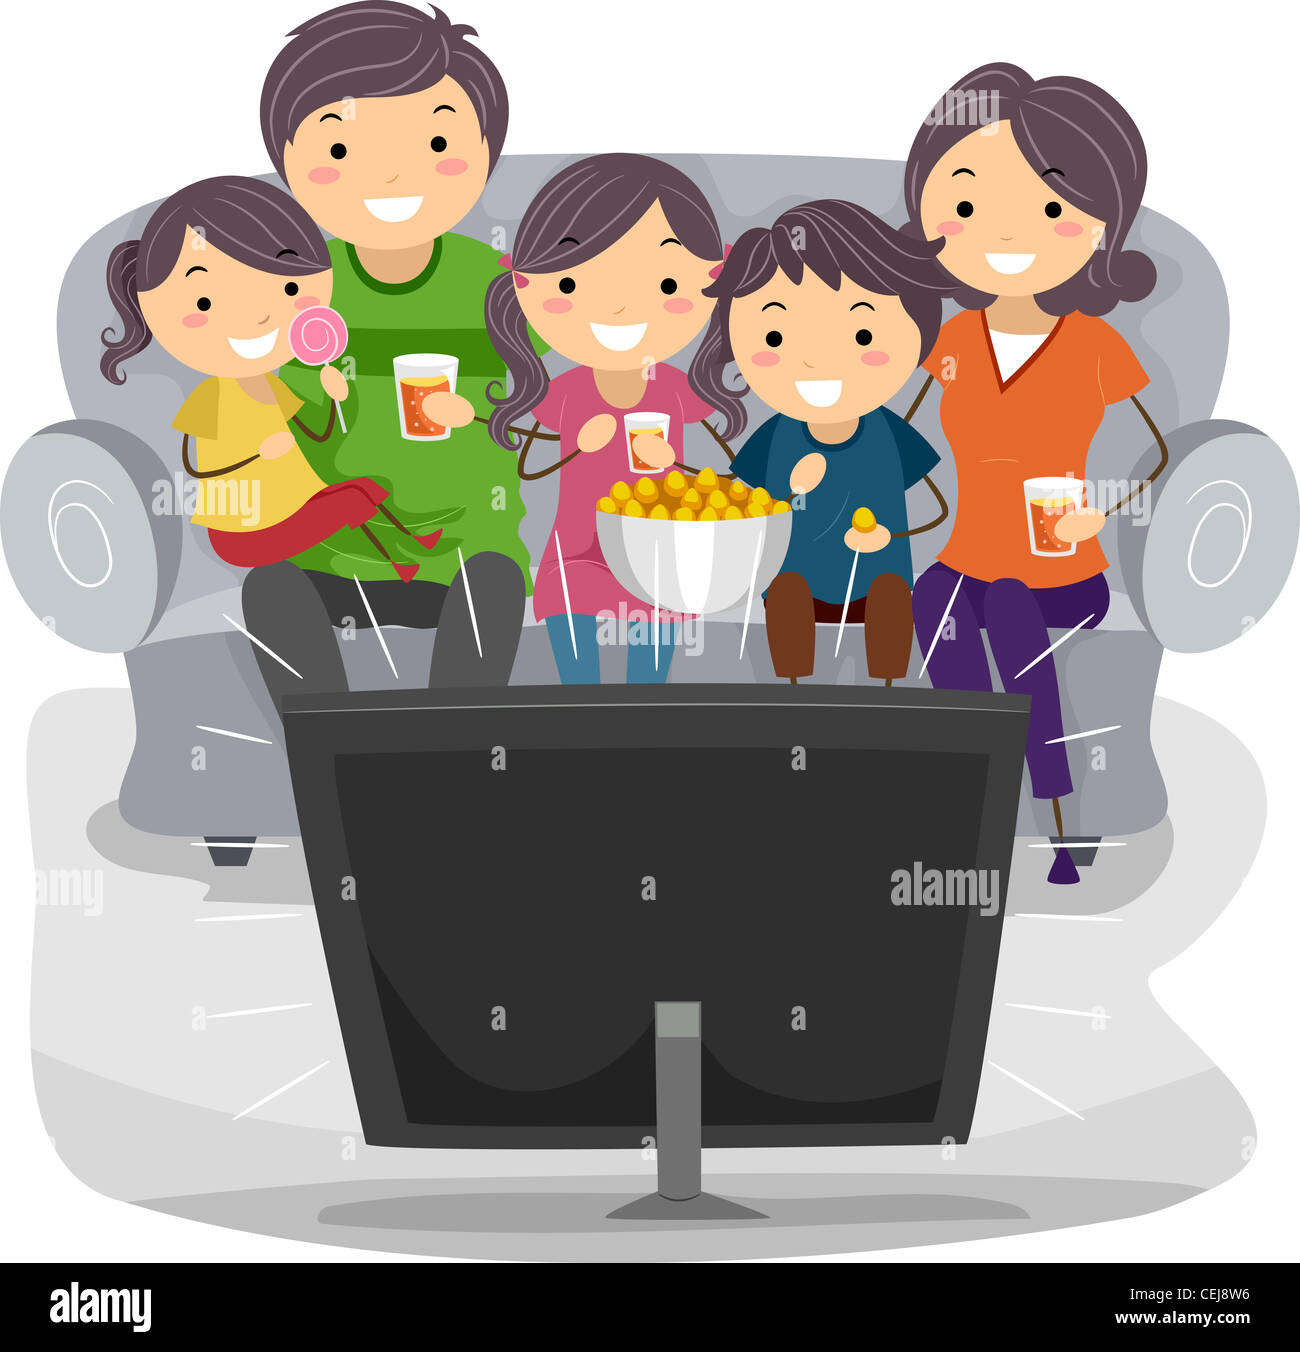 Illustration of a Family Watching a TV Show Together Stock Photo